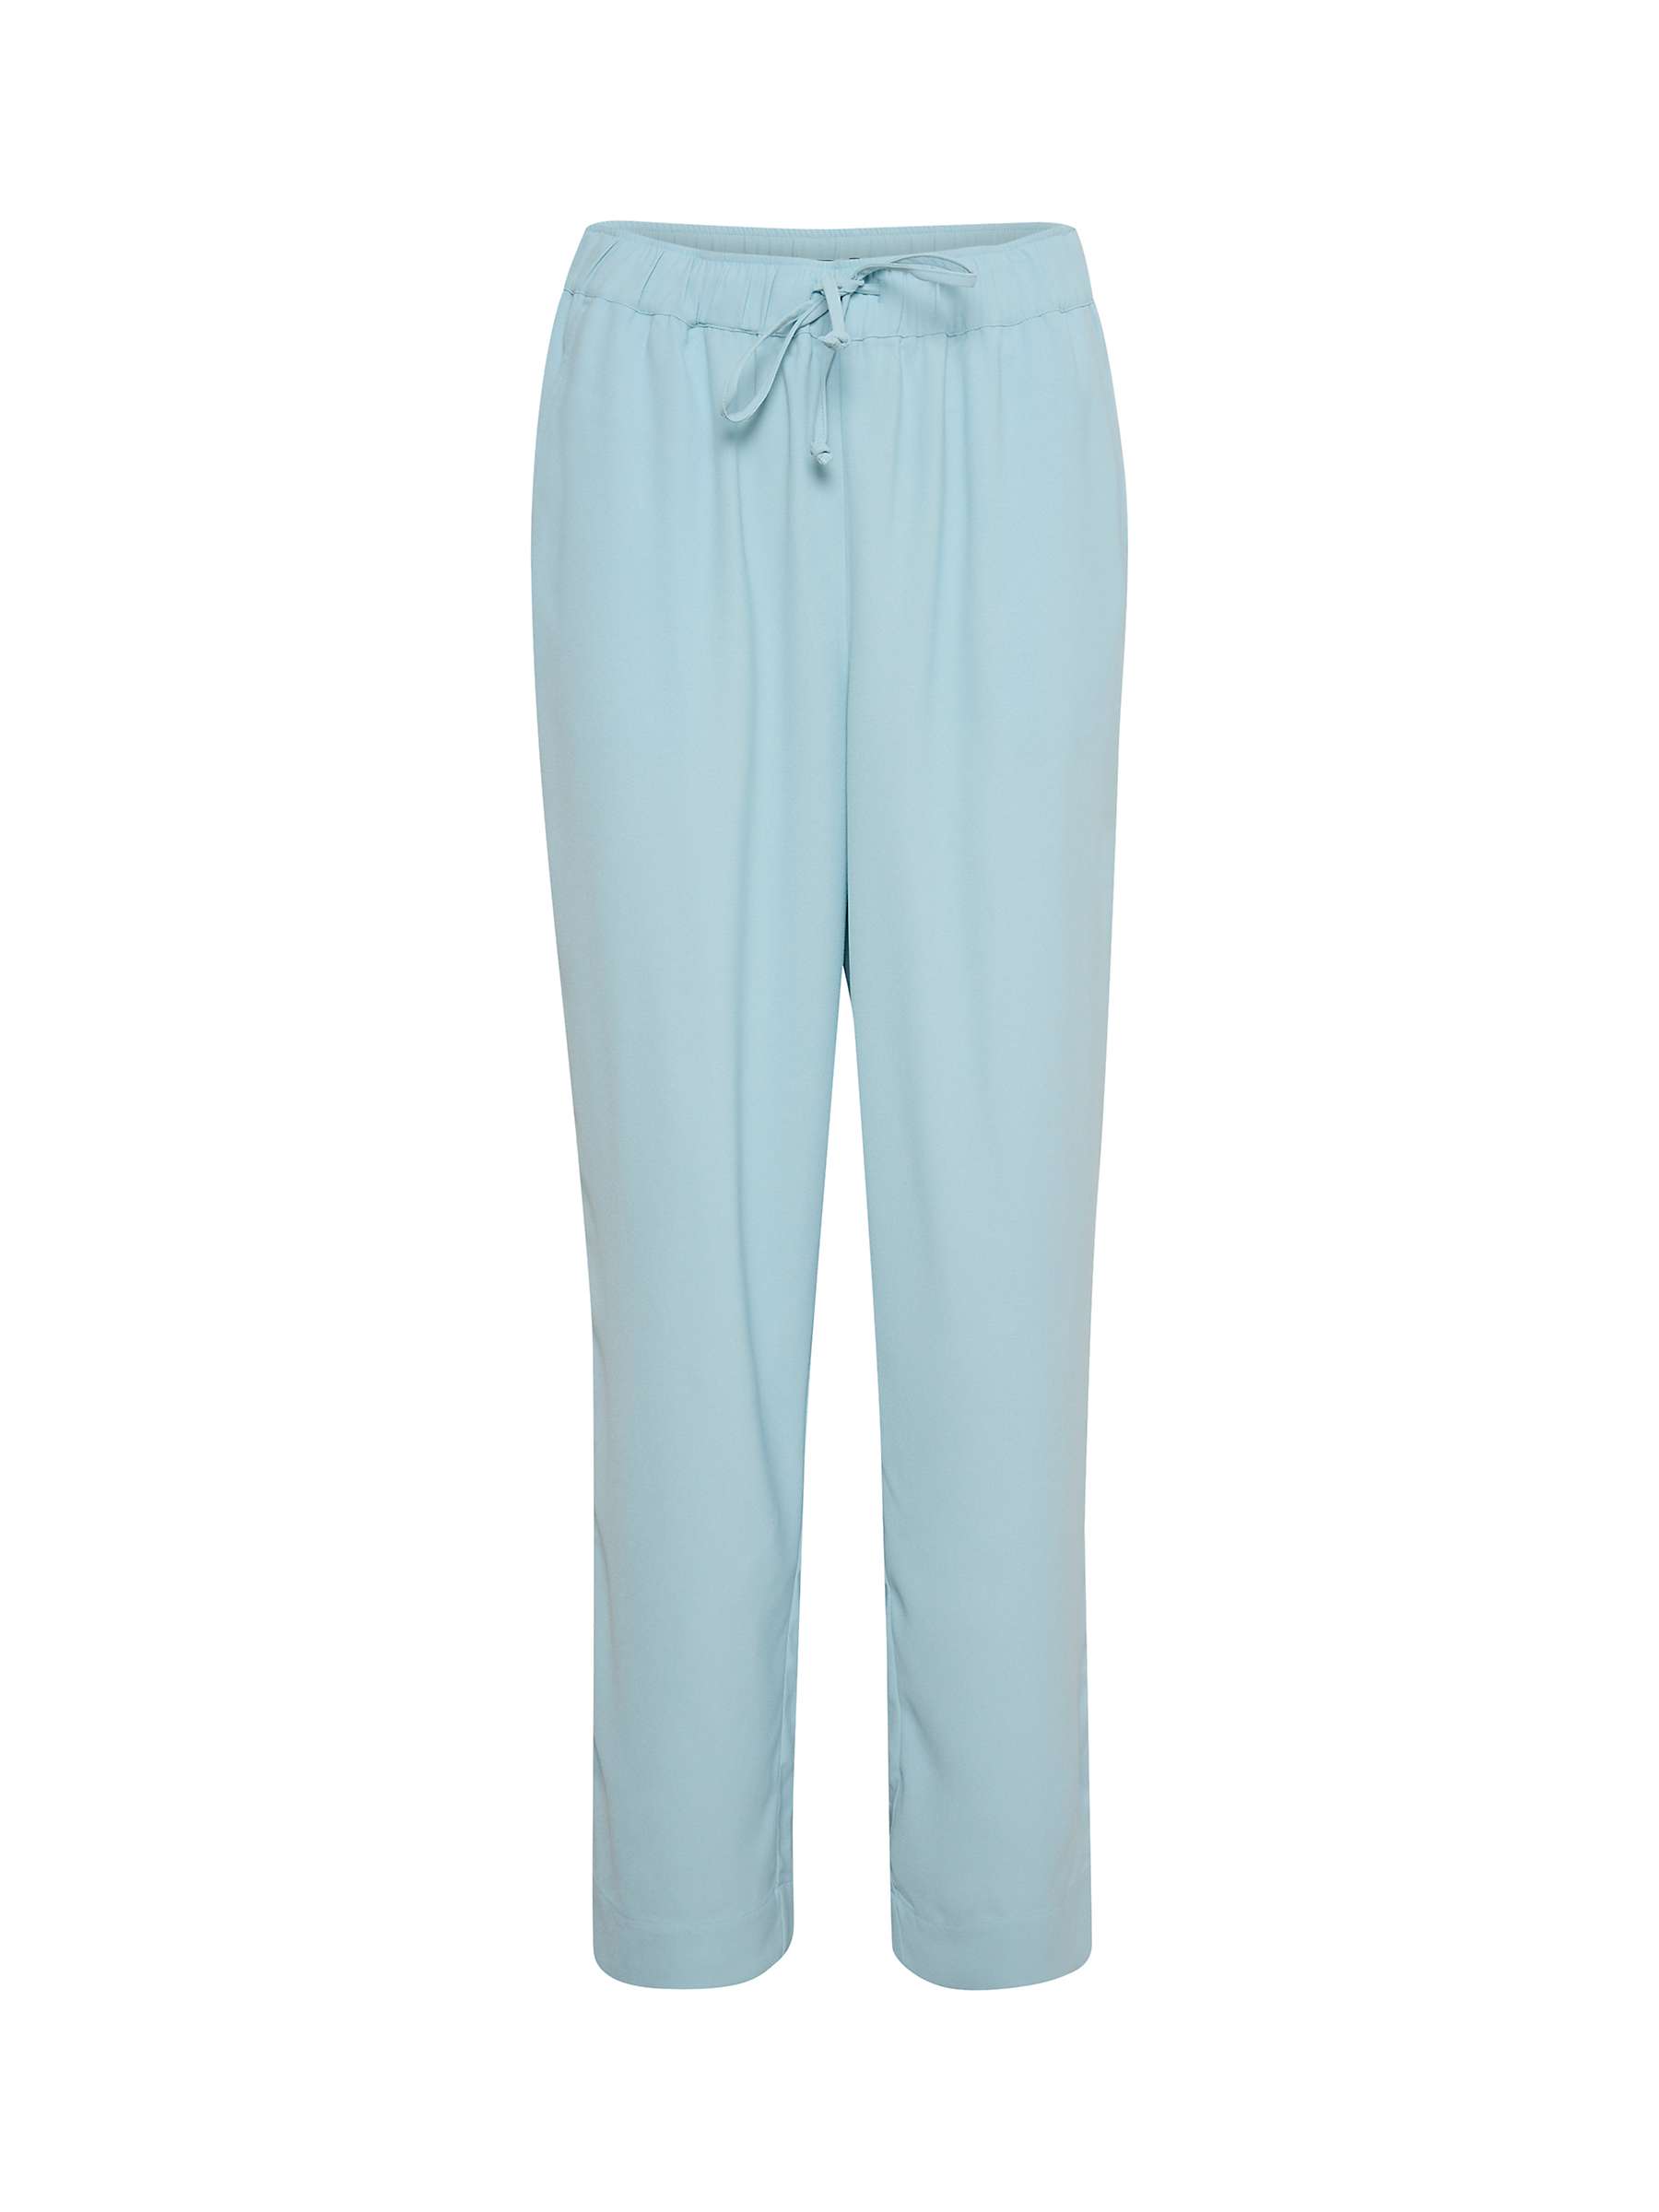 Buy Soaked In Luxury Shirley Plain Tailored Trousers Online at johnlewis.com